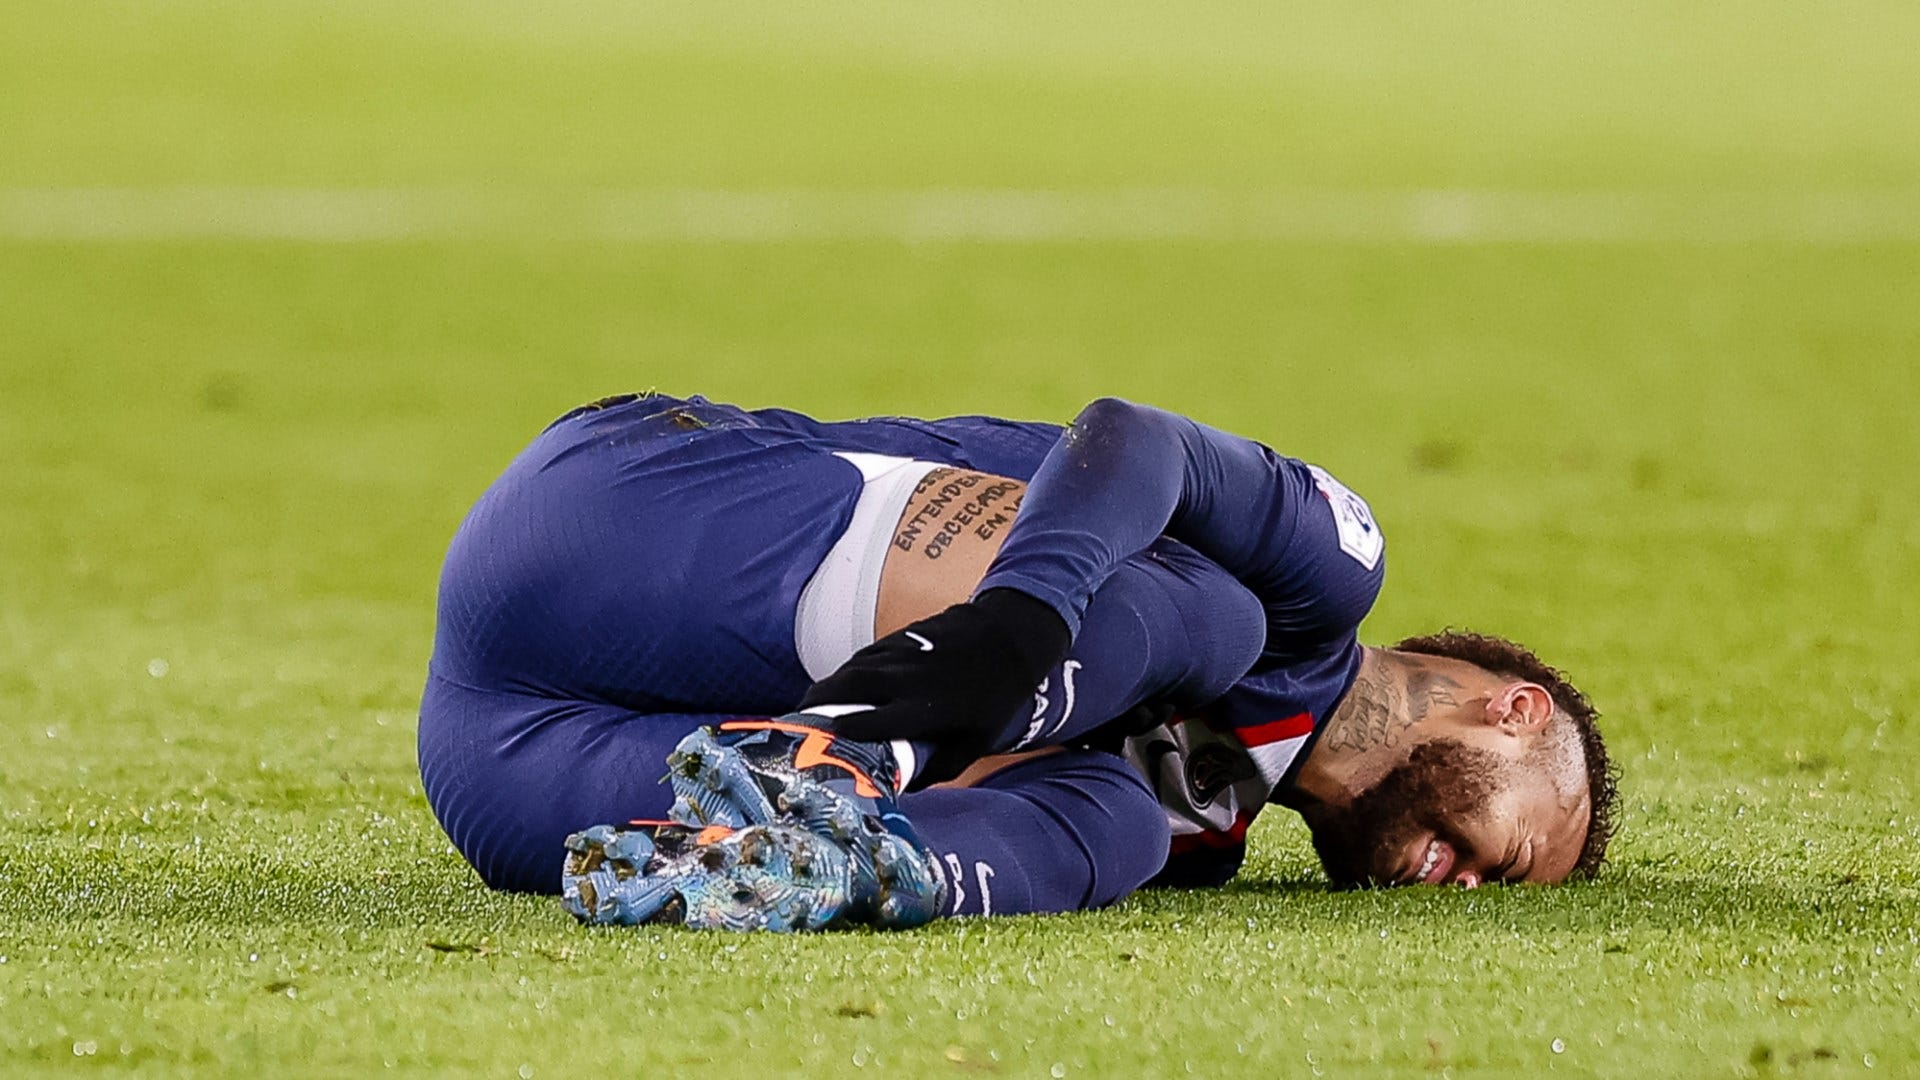 Was Neymar doomed from the start?! Shocking new report reveals Brazilian had ankle stress fracture when PSG signed him from Barcelona in world-record 2017 transfer | Goal.com UK